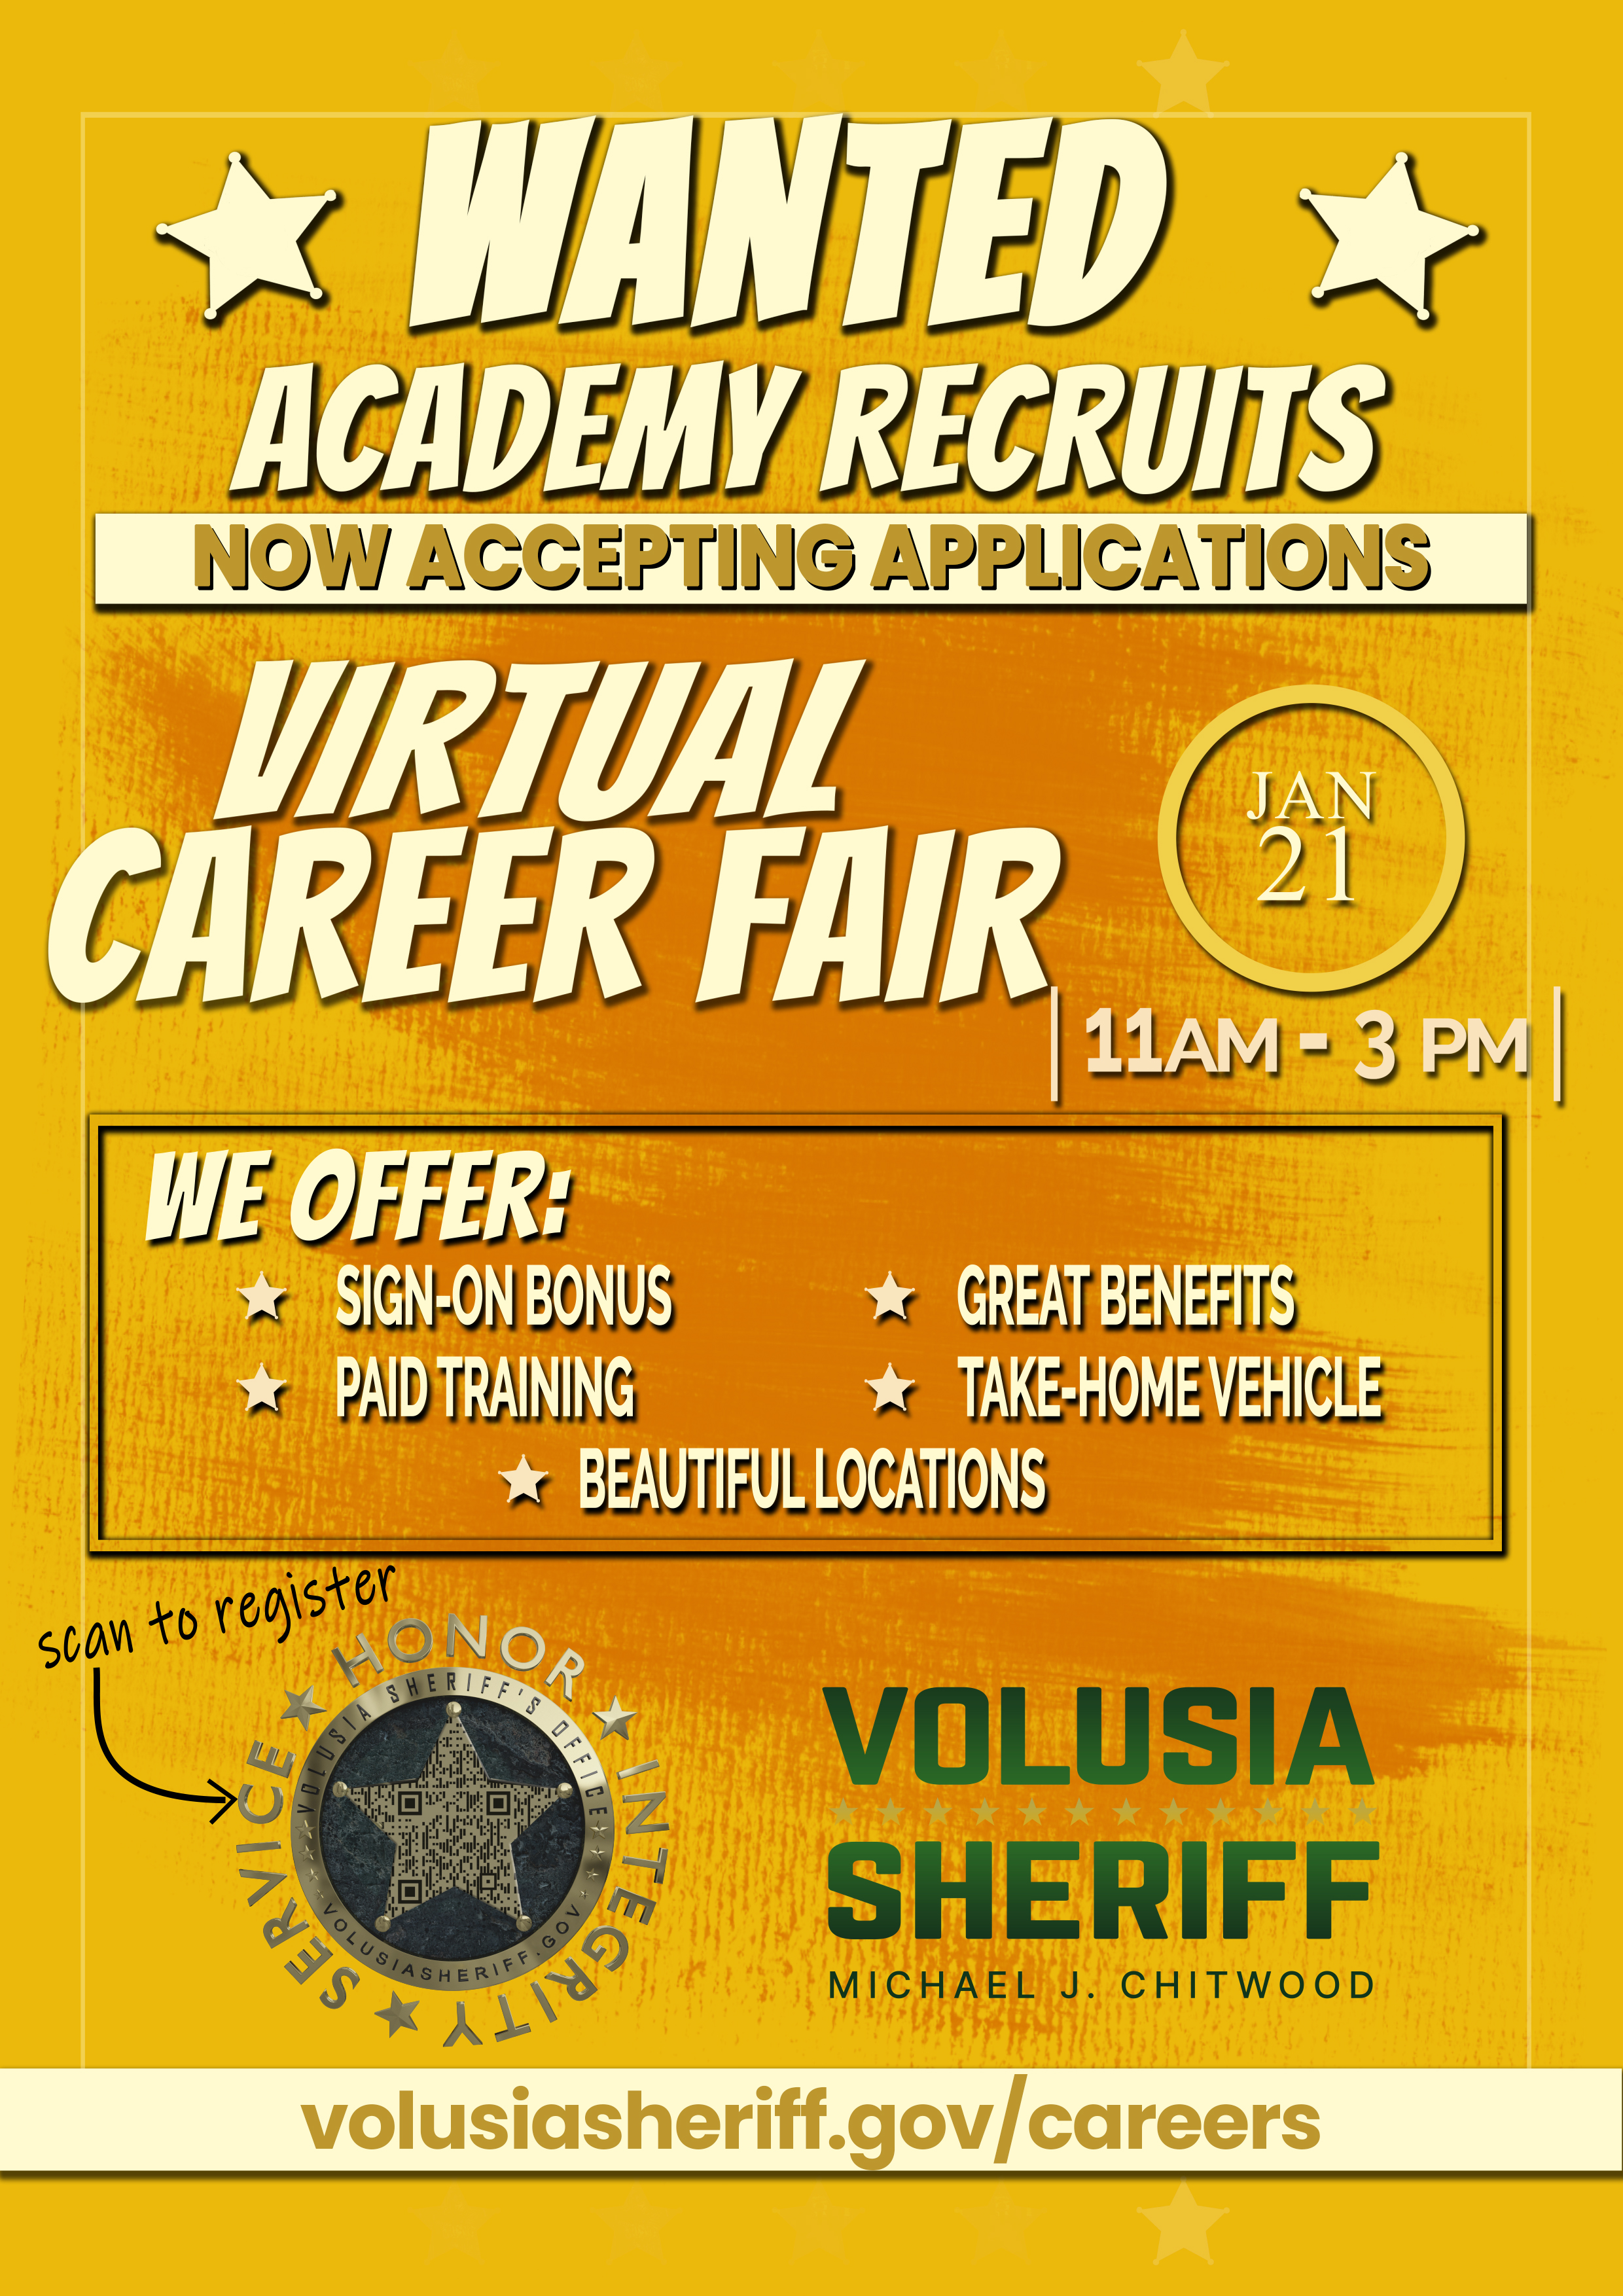 VSO Hosting Live Virtual Career Fair This Saturday With vFairs Image